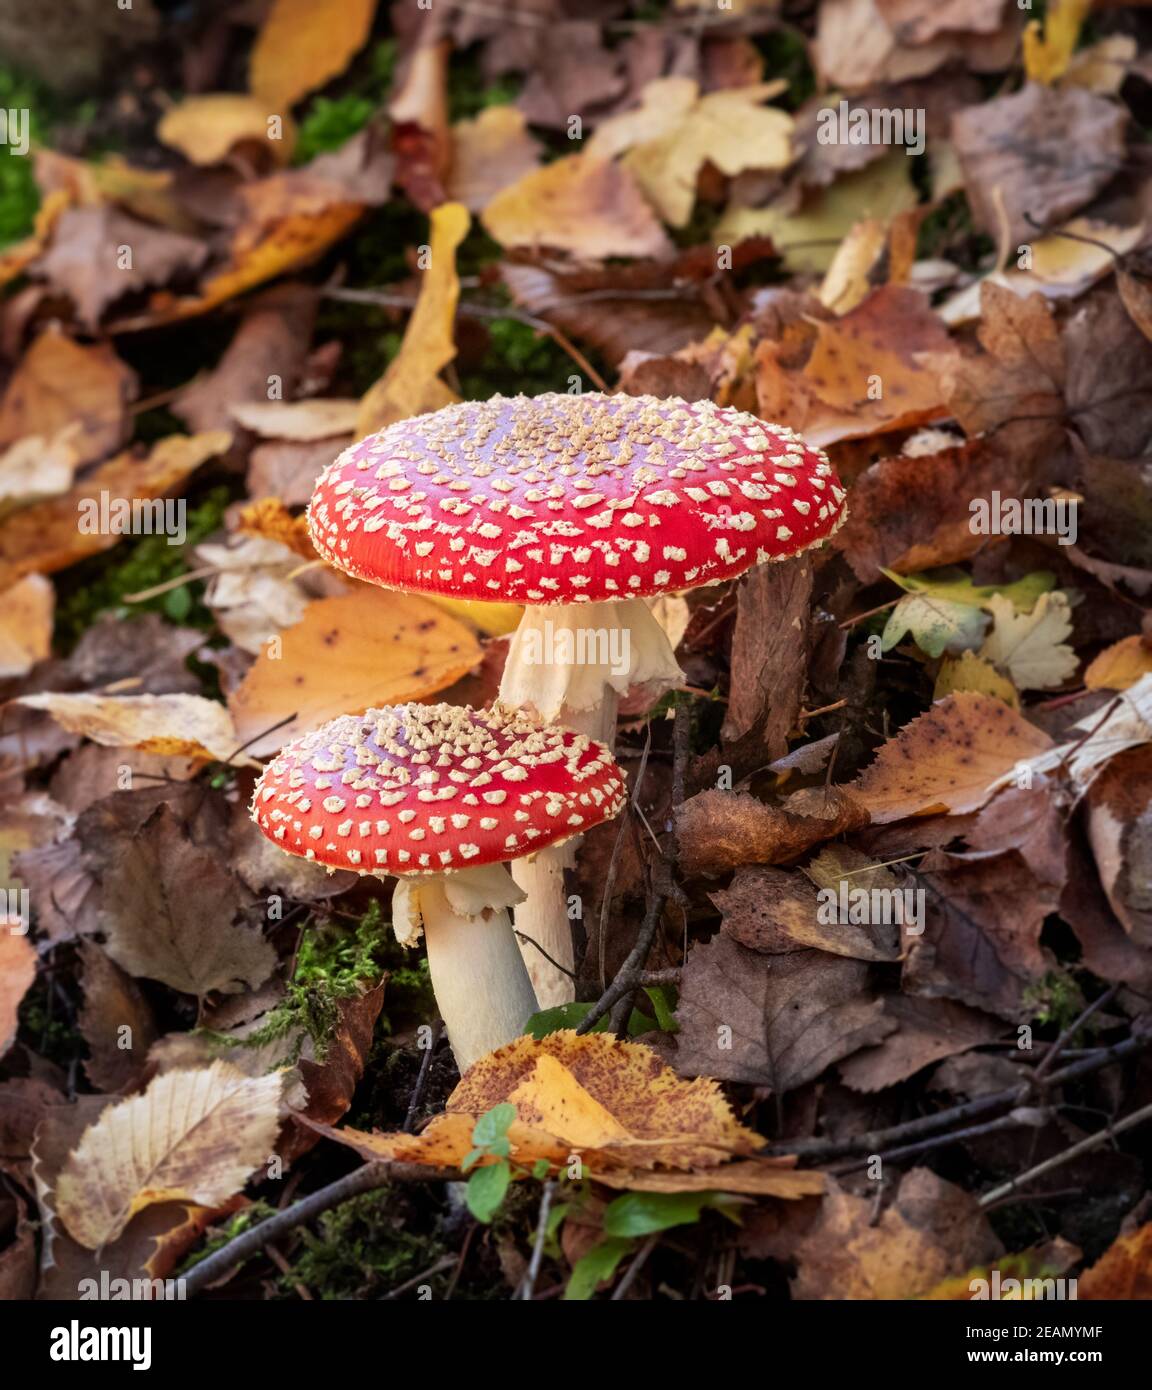 Gruppe der Red fly agaric musrooms Stockfoto